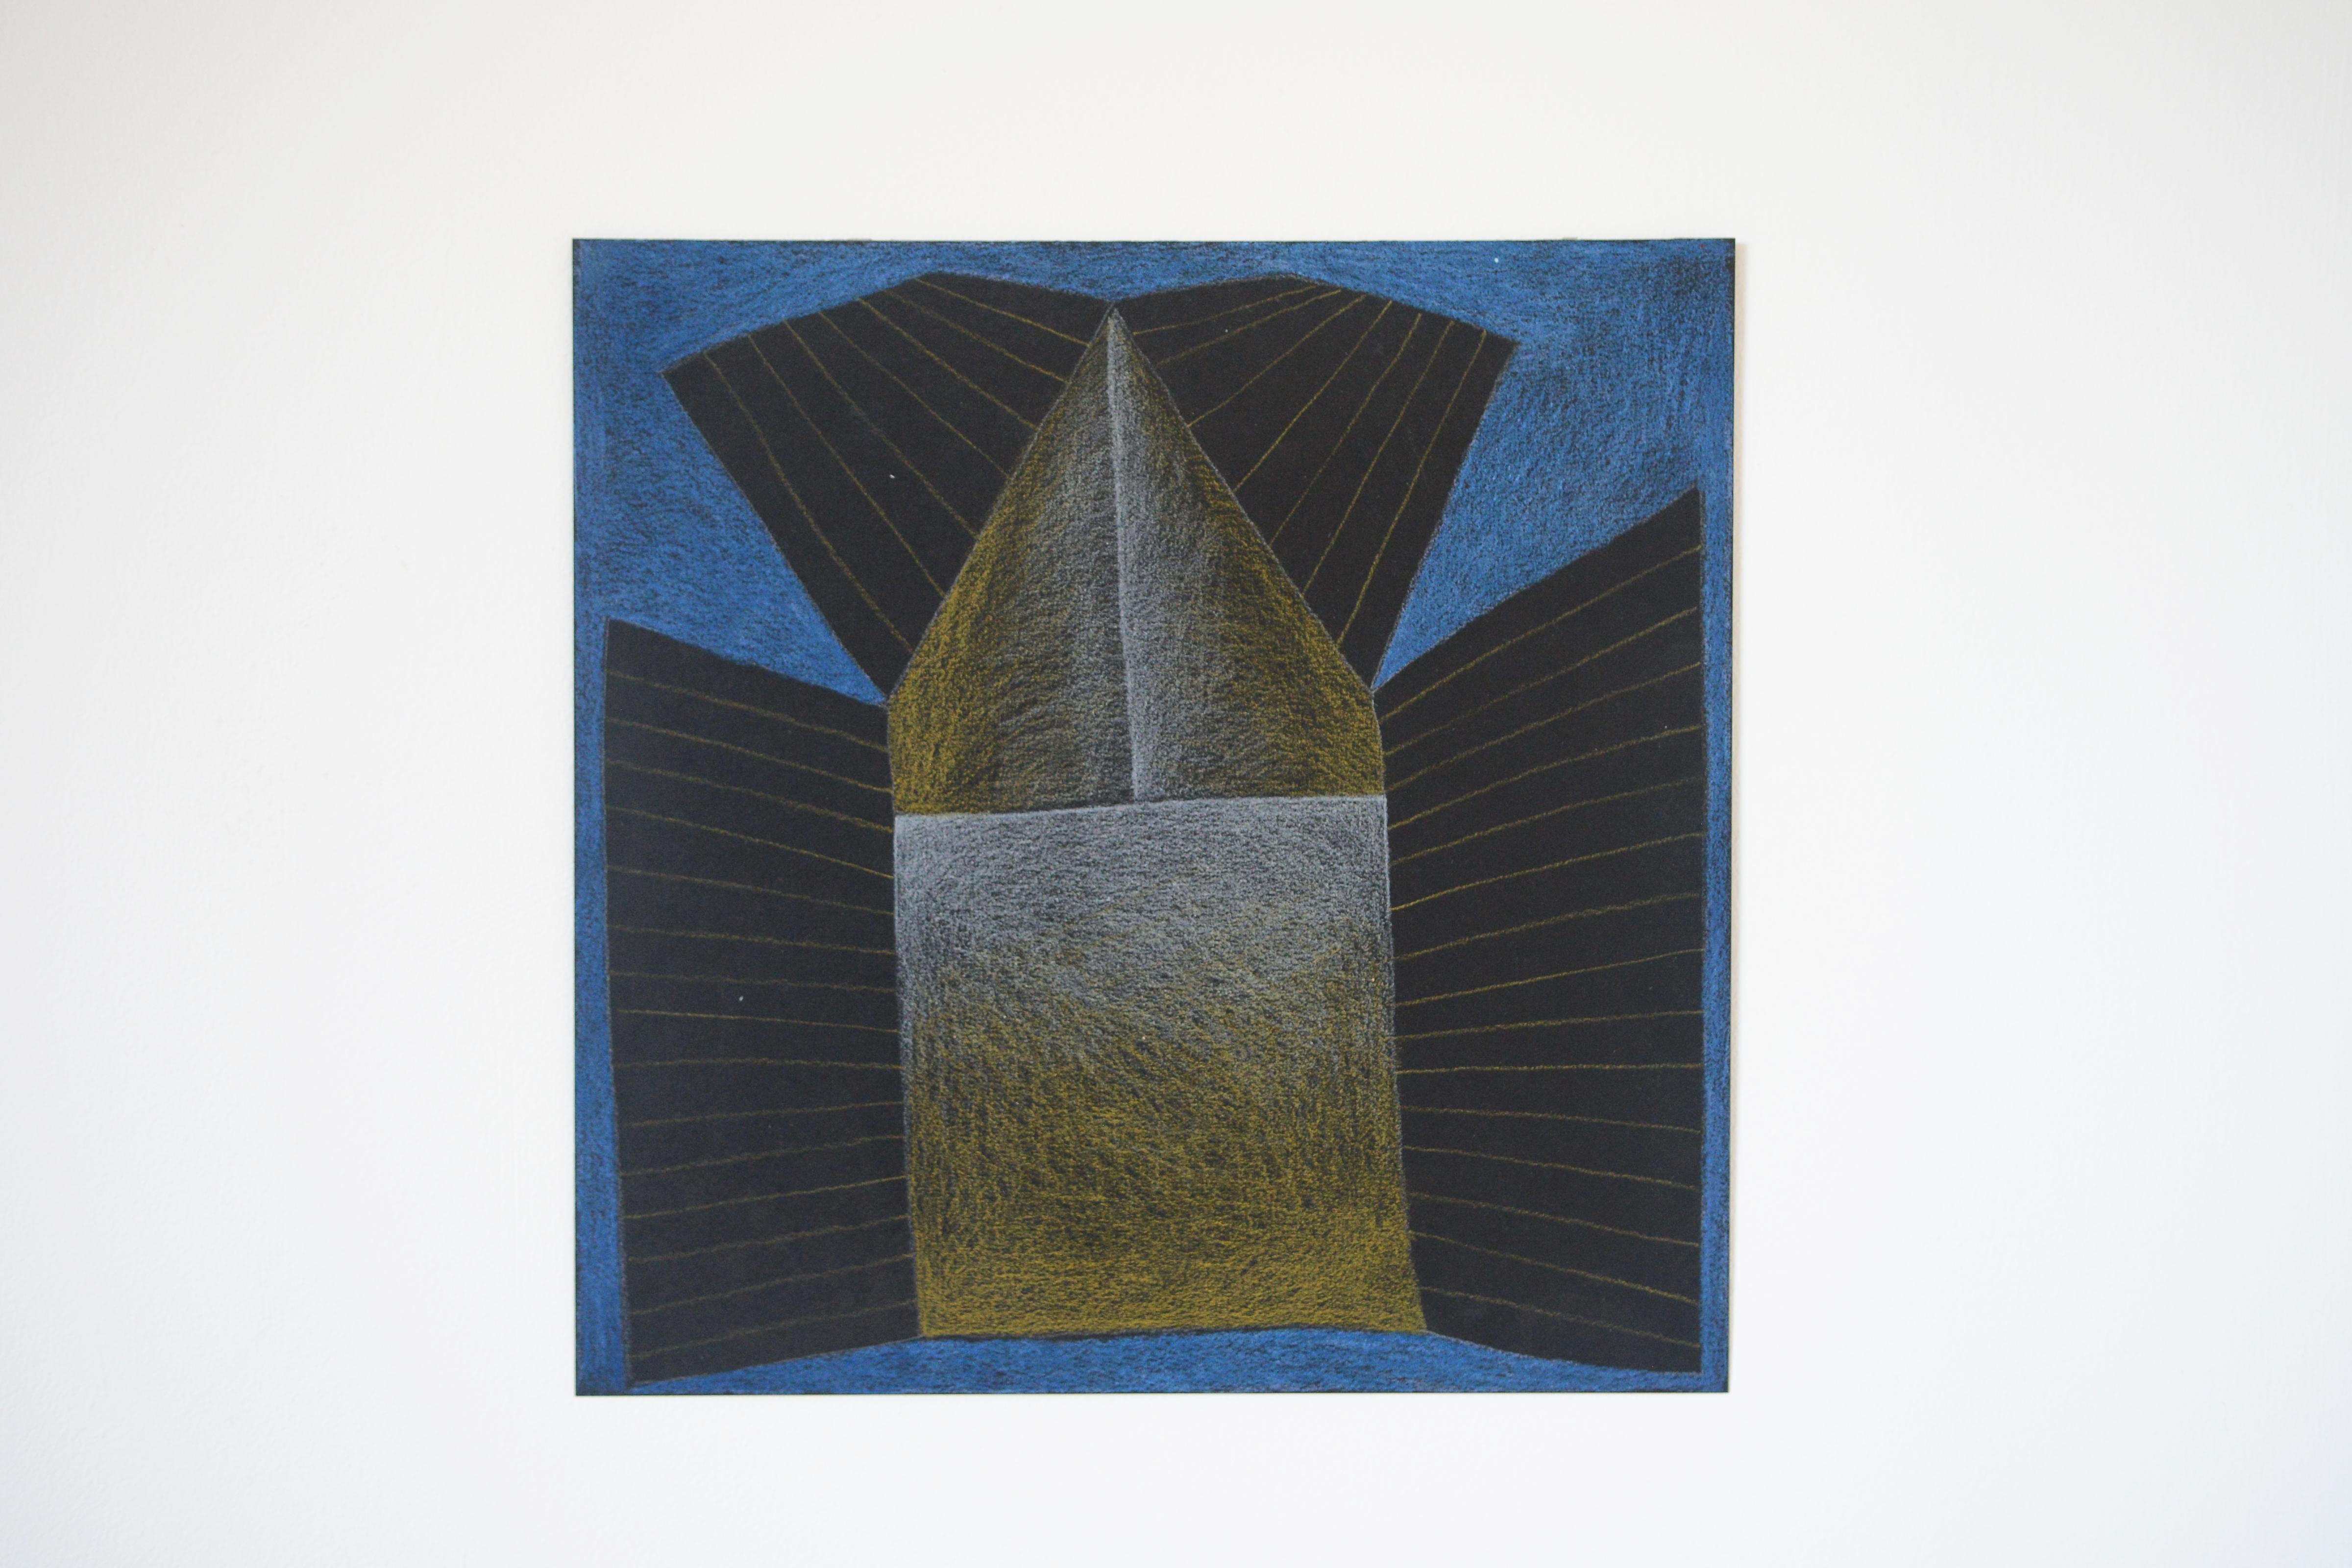 Opening Houses on Black 4, 2022. Coloured pencil on black paper, 20 x 20cm

Nicky Marais (b. 1962) is a Namibian artist, educator and activist. Marais is well-known for her abstract artworks created using a personal vocabulary of abstract forms and